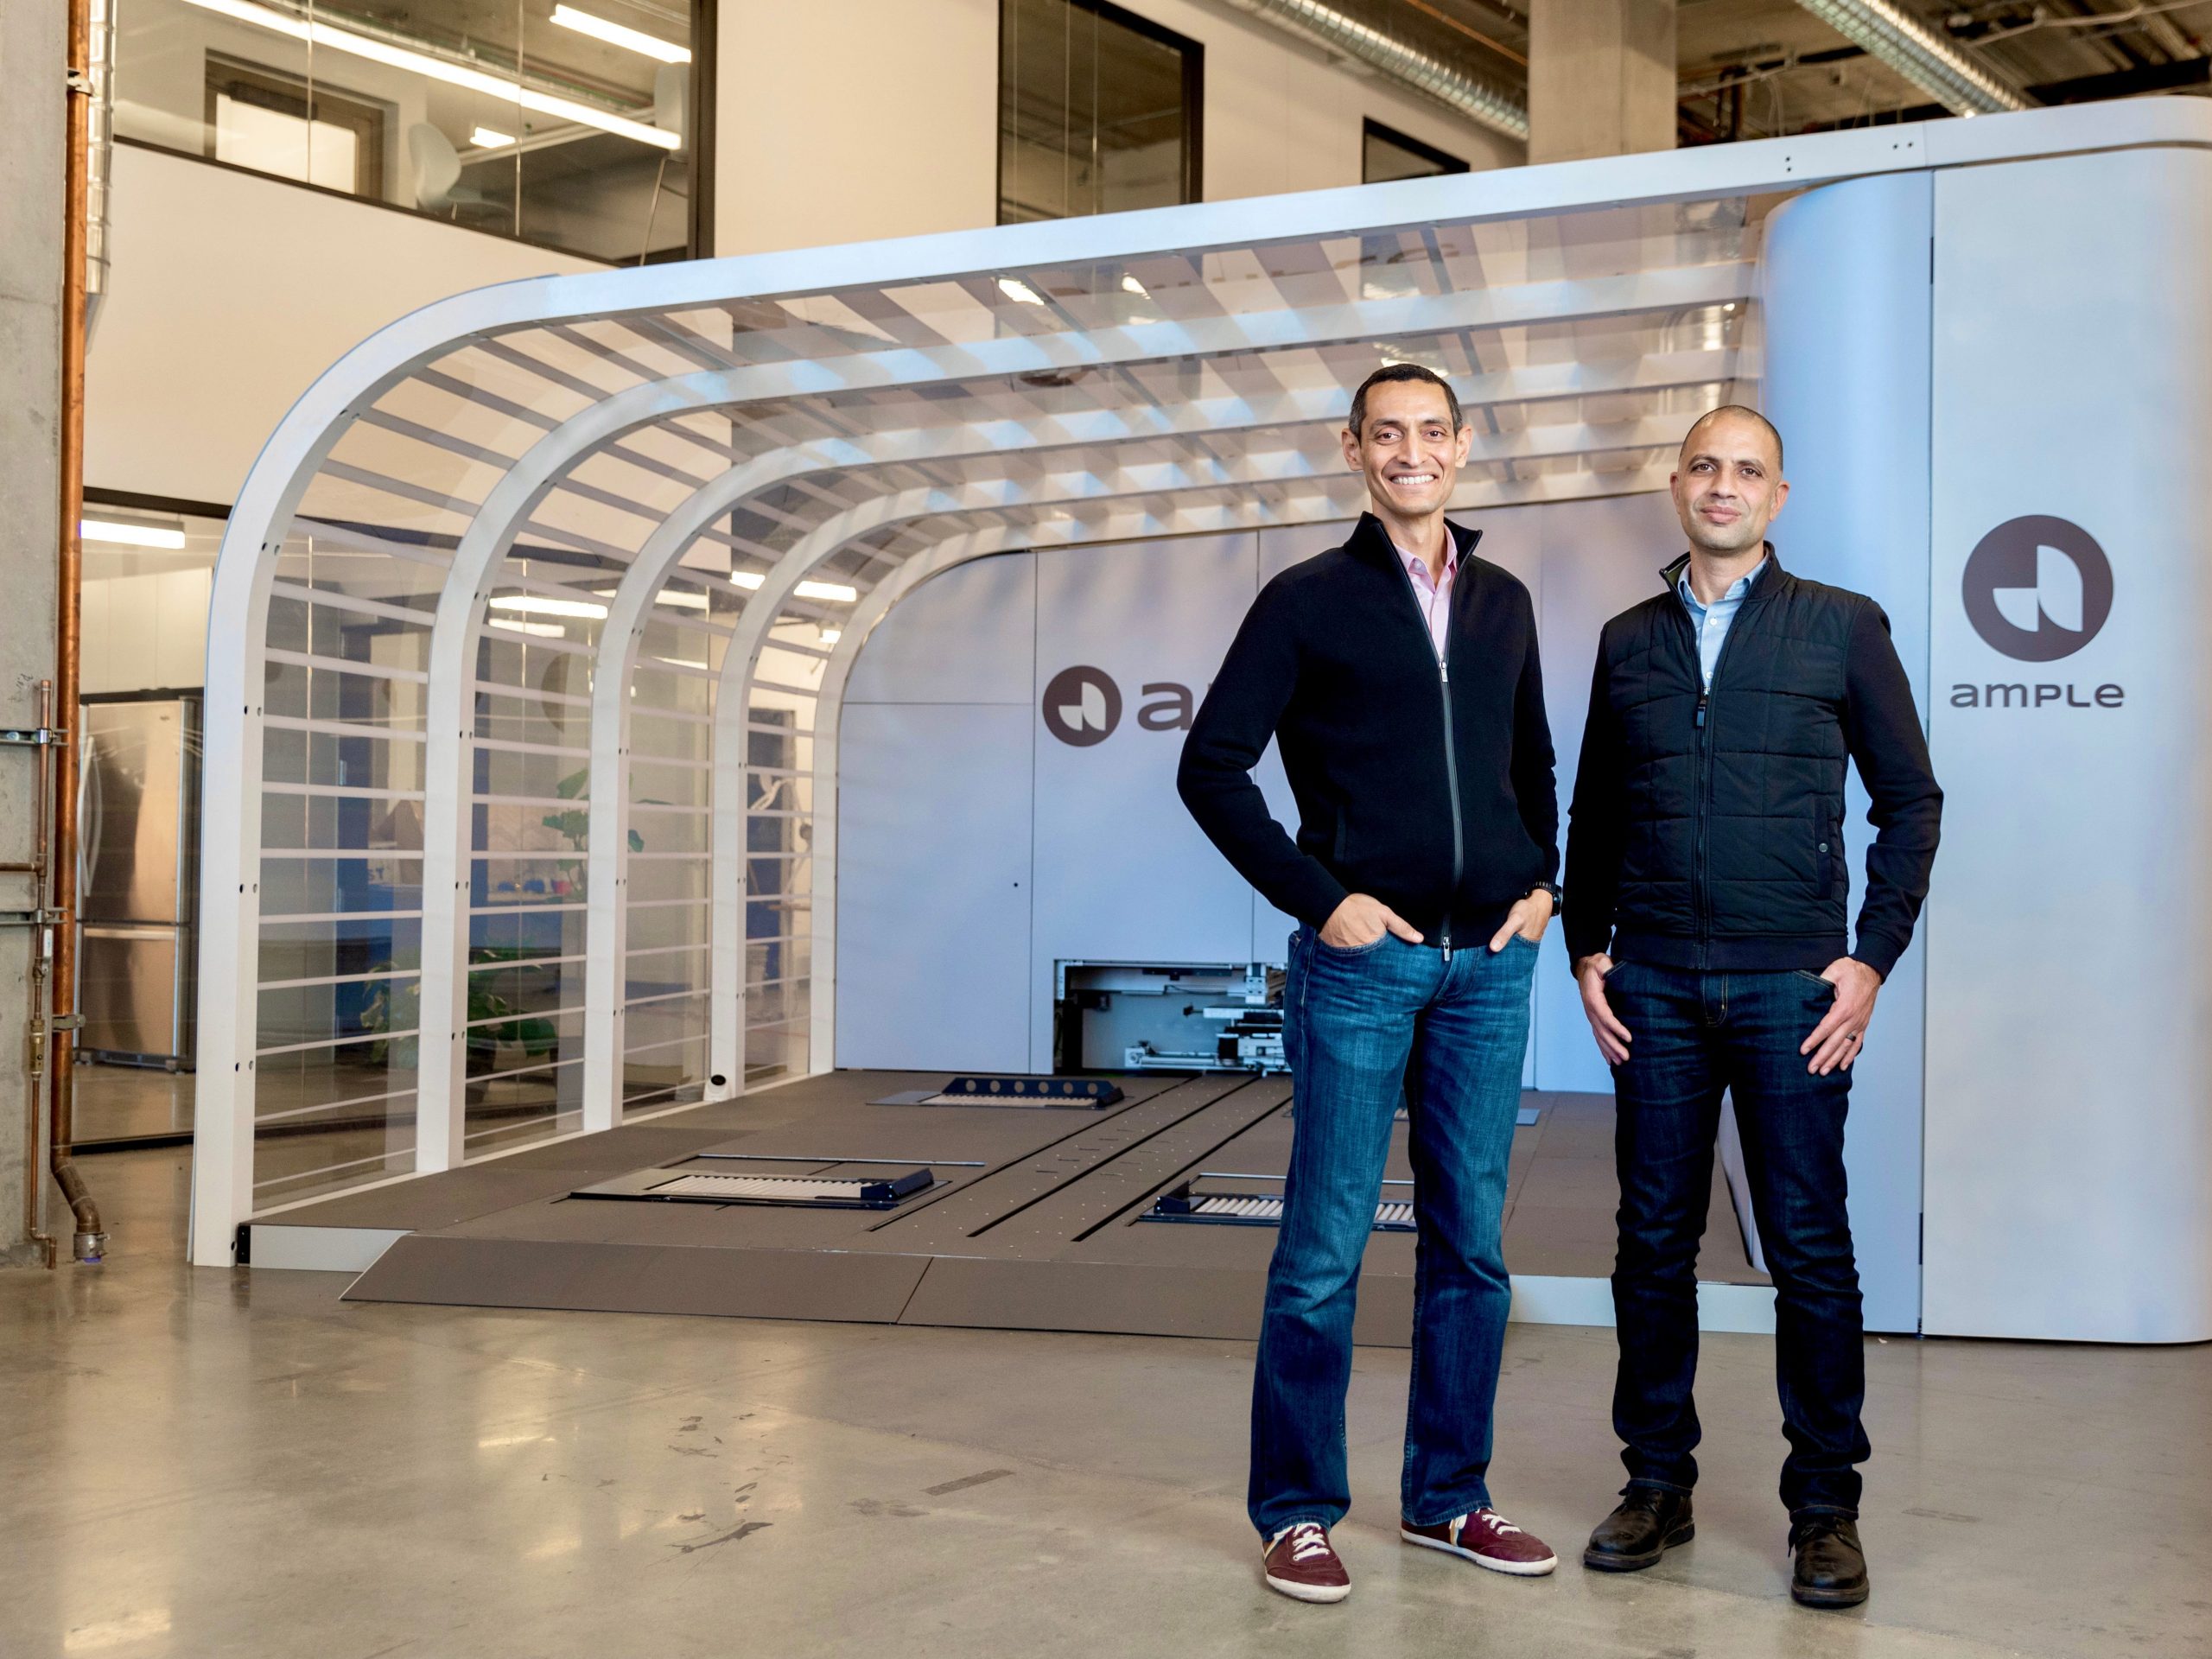 Ample founders Khaled Hassounah and John de Souza stand in front of a battery swapping station.